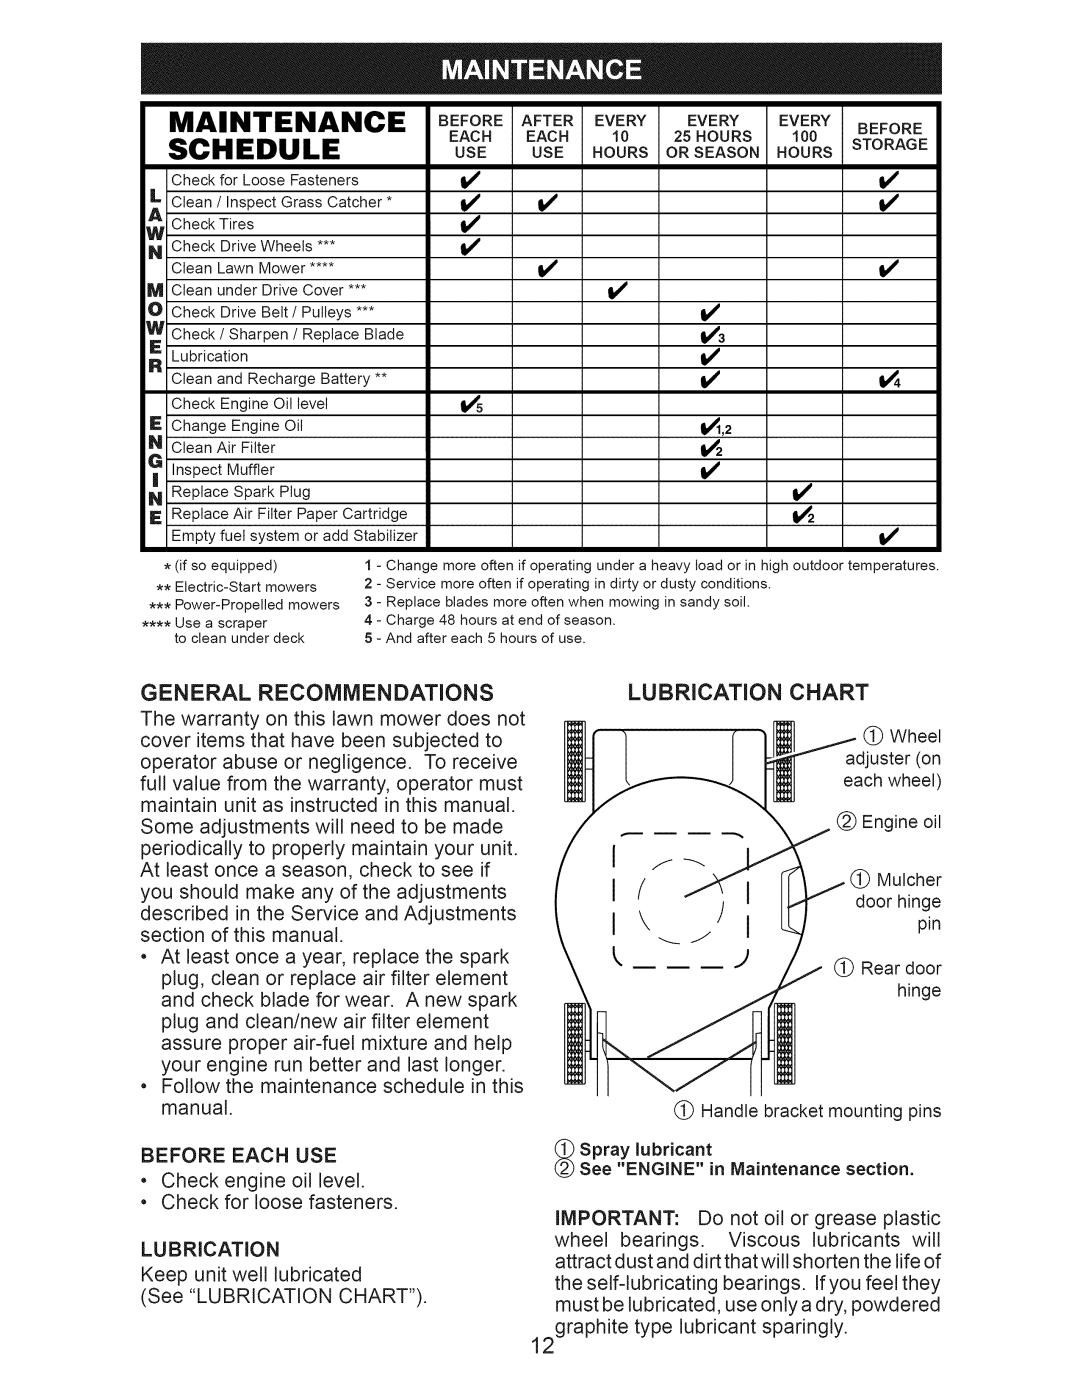 Craftsman 917.374093 owner manual Maintenance, Schedule, Use Hours 